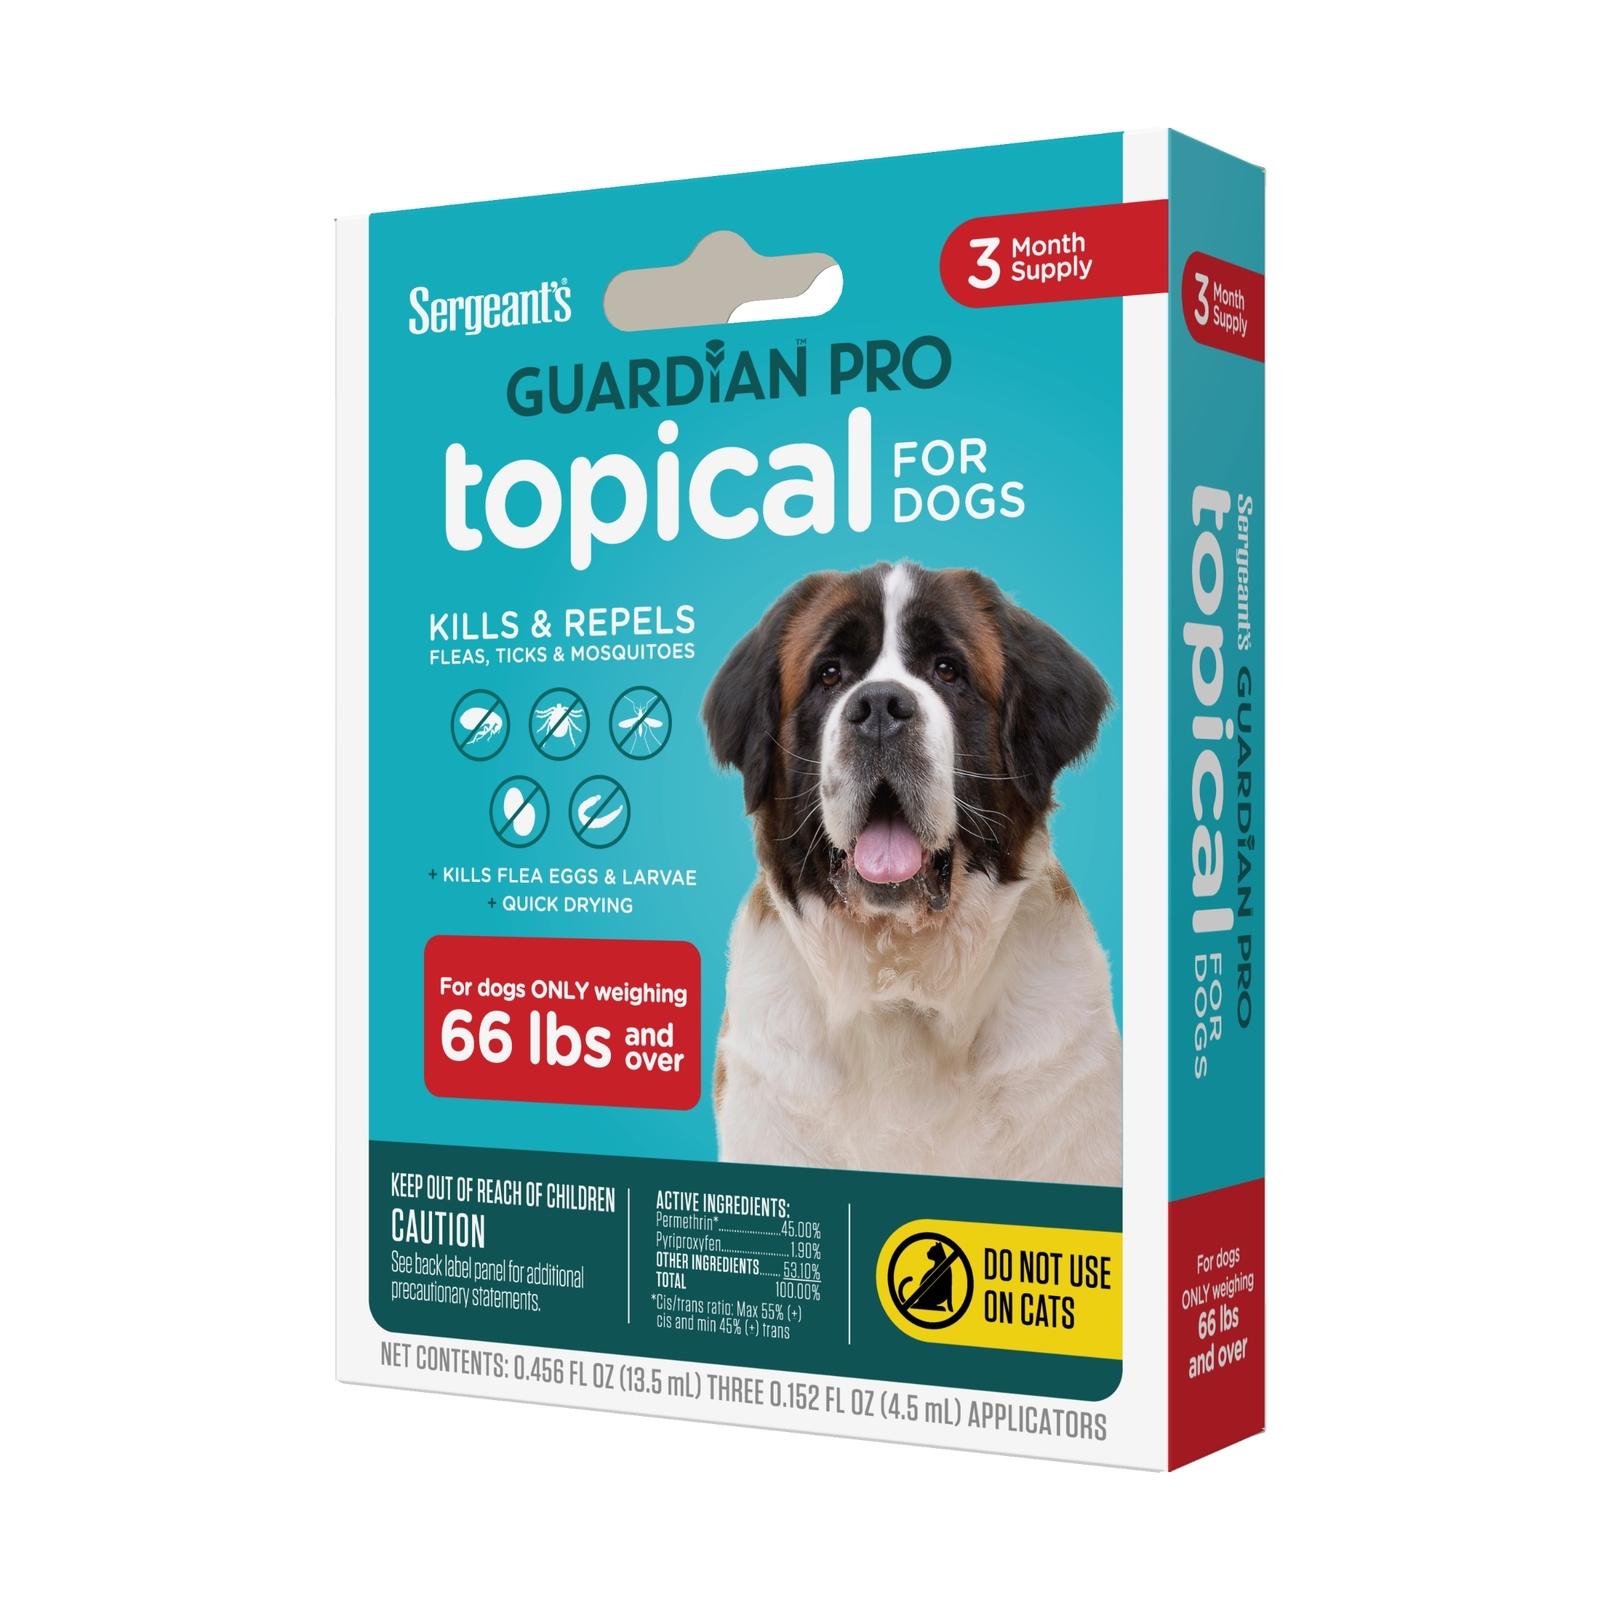 Sergeant's Guardian Pro Flea & Tick Topical for Dogs, 66 lbs and Over, 3 Count